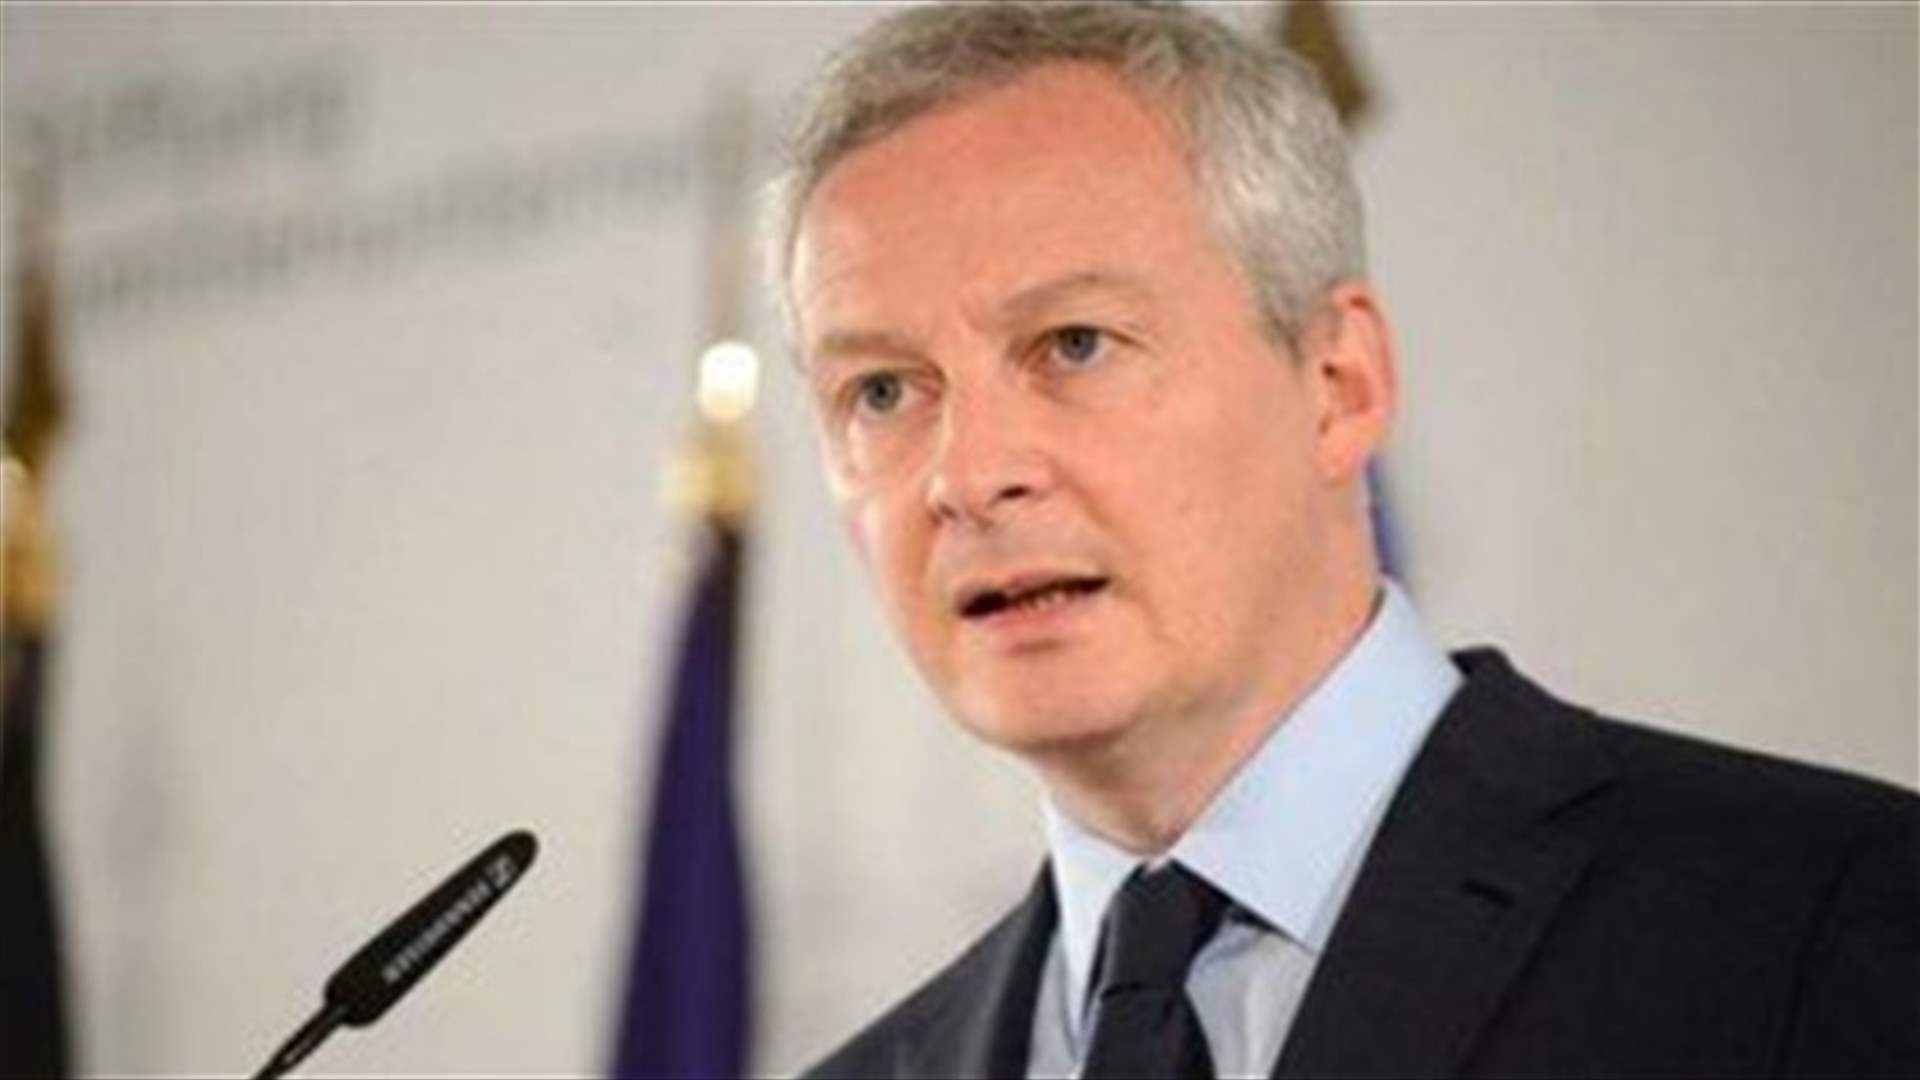 France will back Lebanon, including an IMF plan - Le Maire